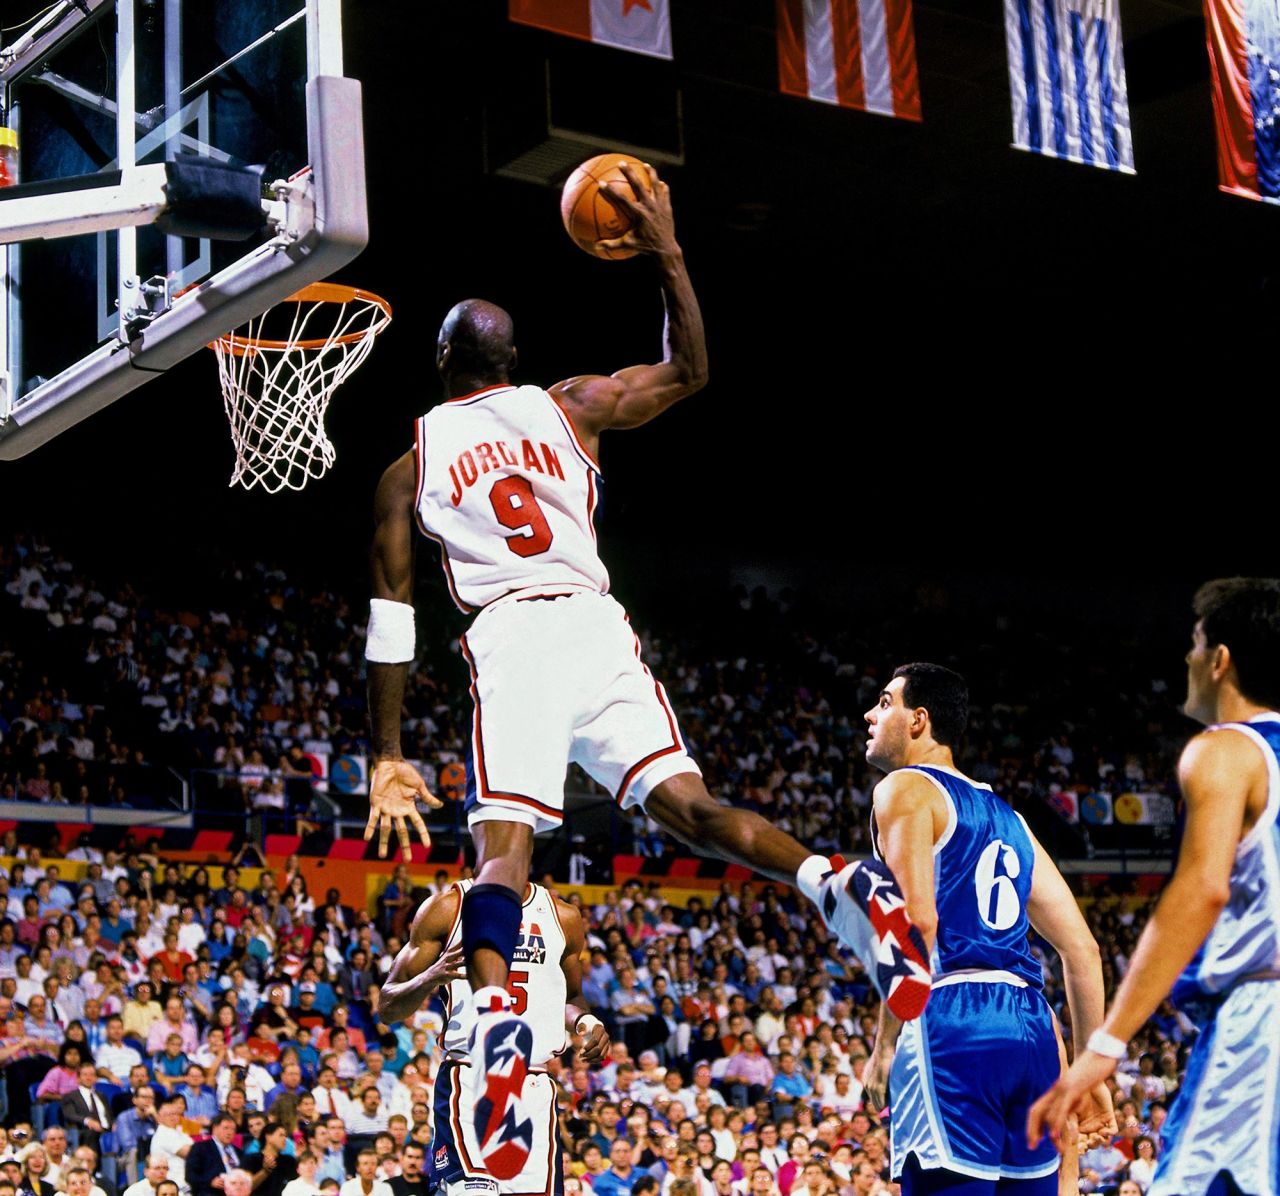 Michael Jordan soars for a dunk during the 1992 Olympics in Barcelona, Spain. Jordan was a part of the "Dream Team," the US men's basketball team that was the first to include NBA stars. Many consider that team, which included Larry Bird, Magic Johnson and many other future Hall of Famers, to be the greatest sports team ever assembled.